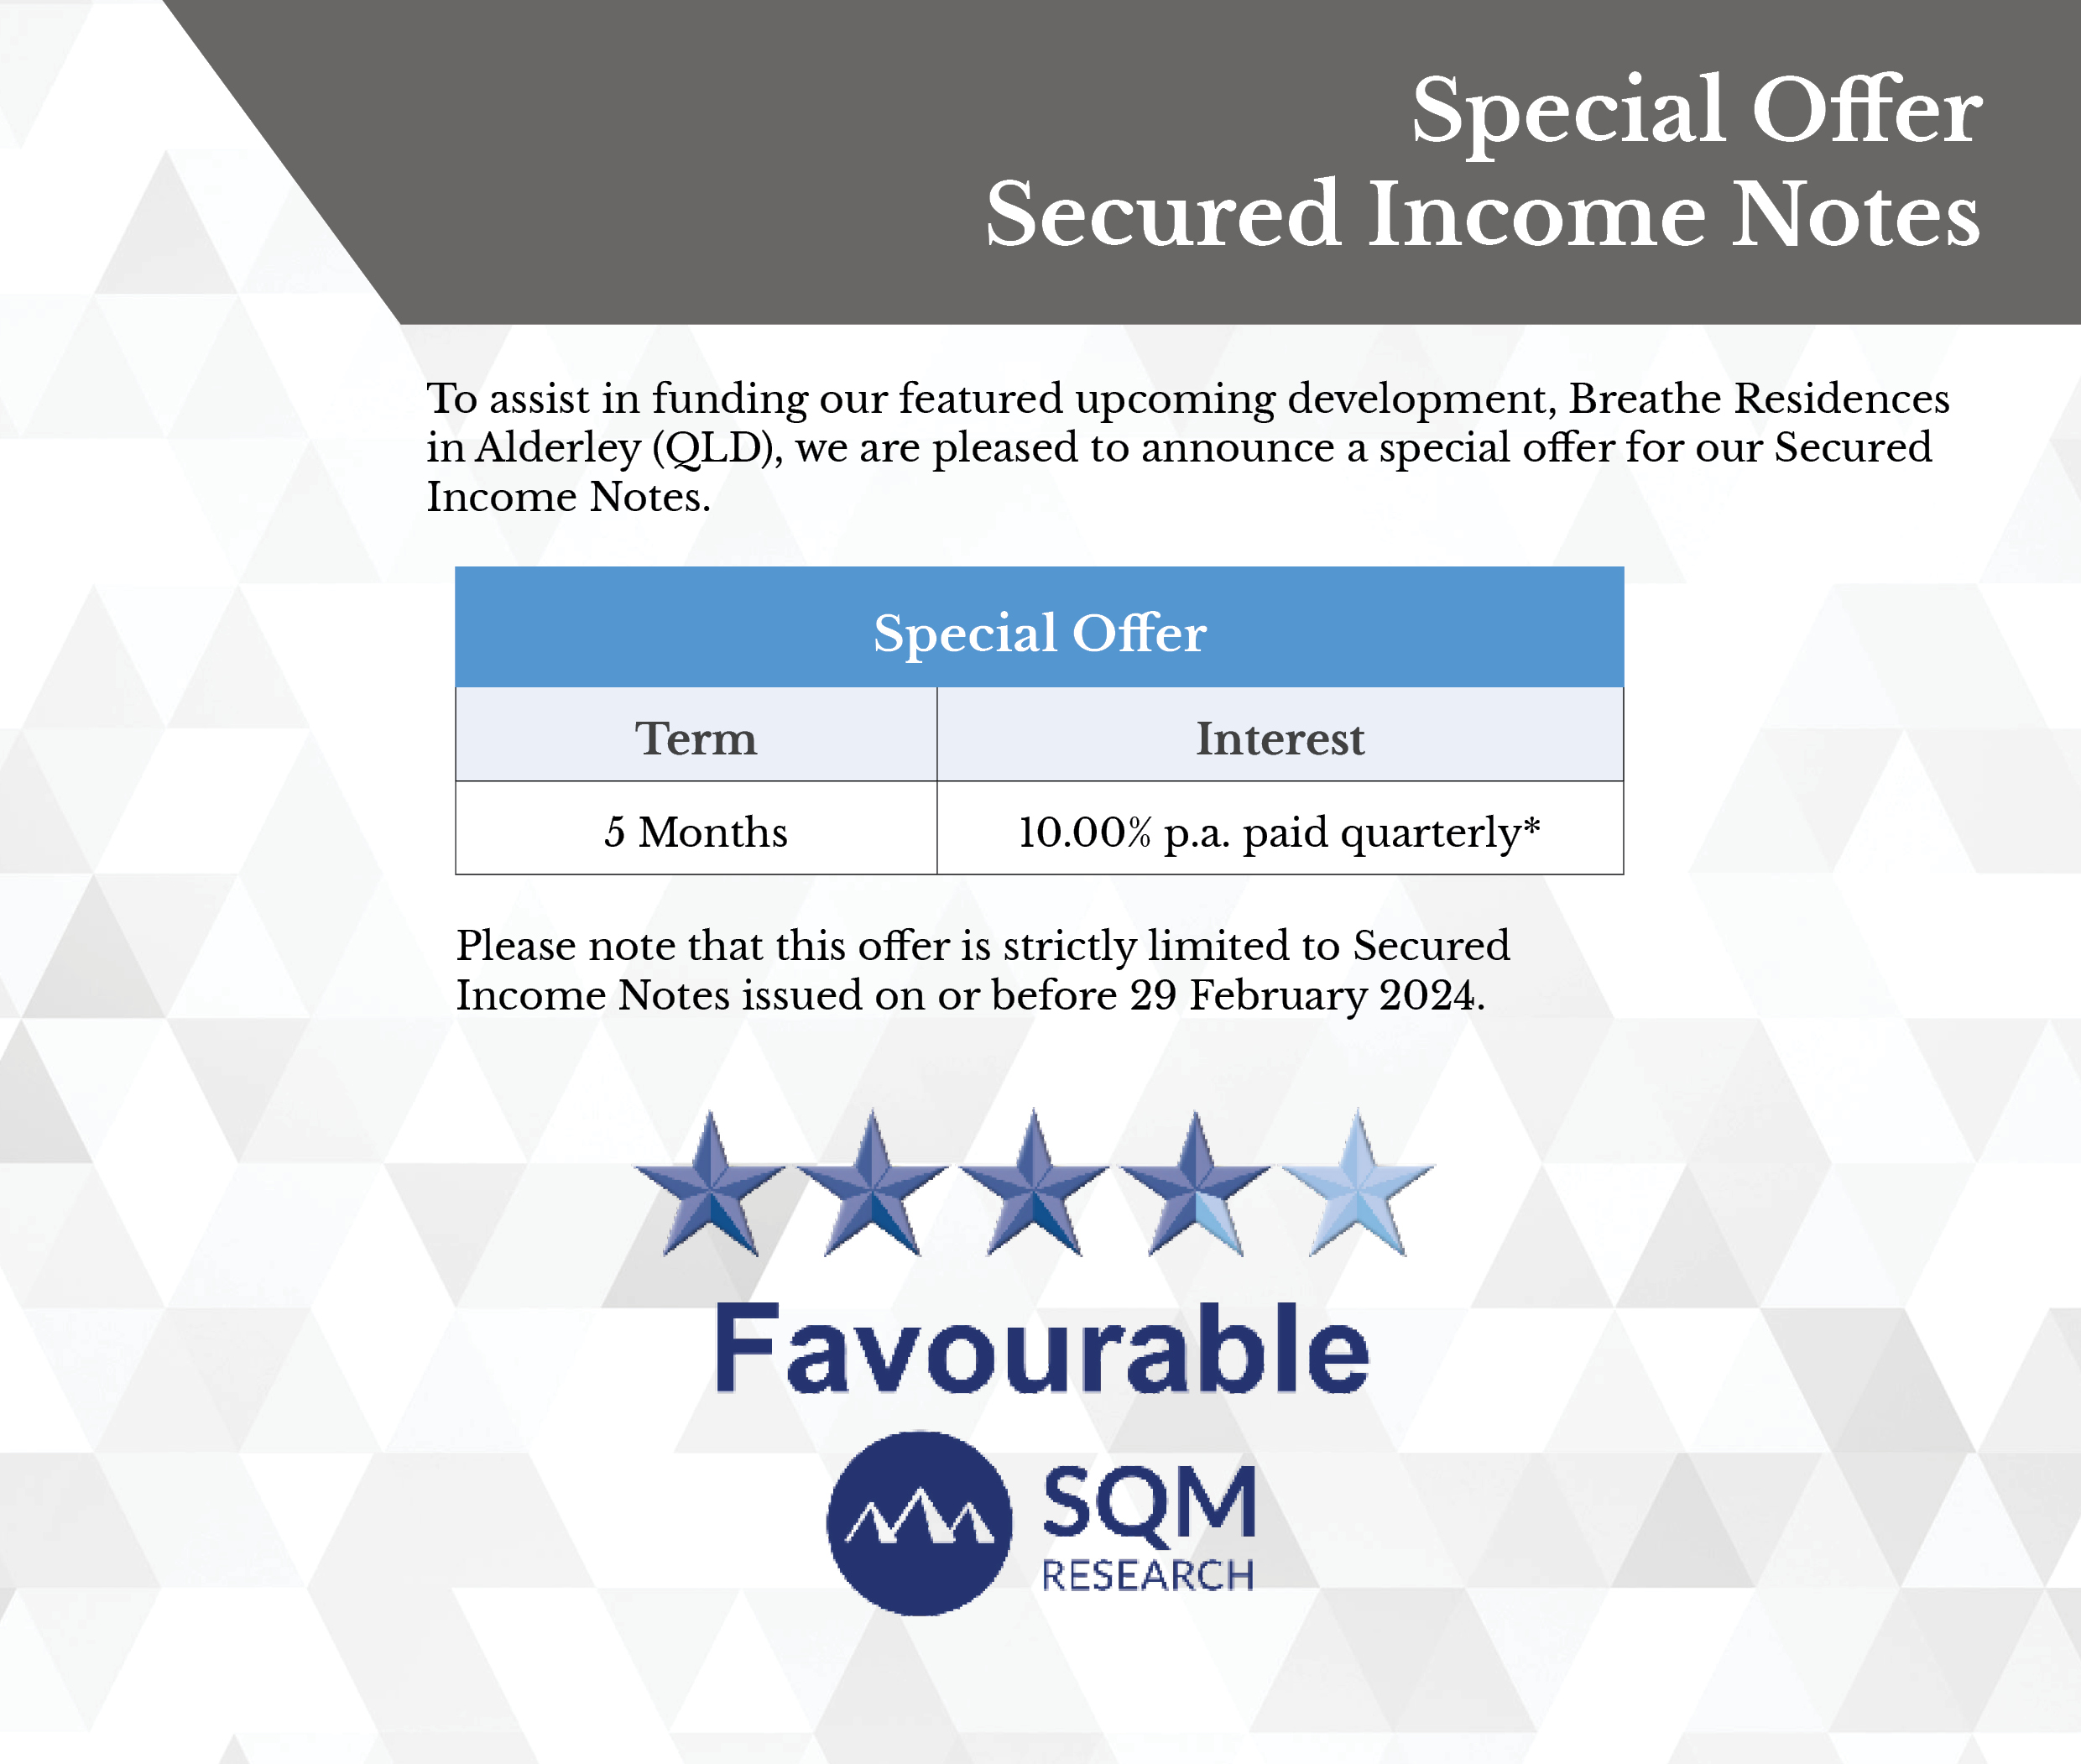 Special Offer Secured Income Notes